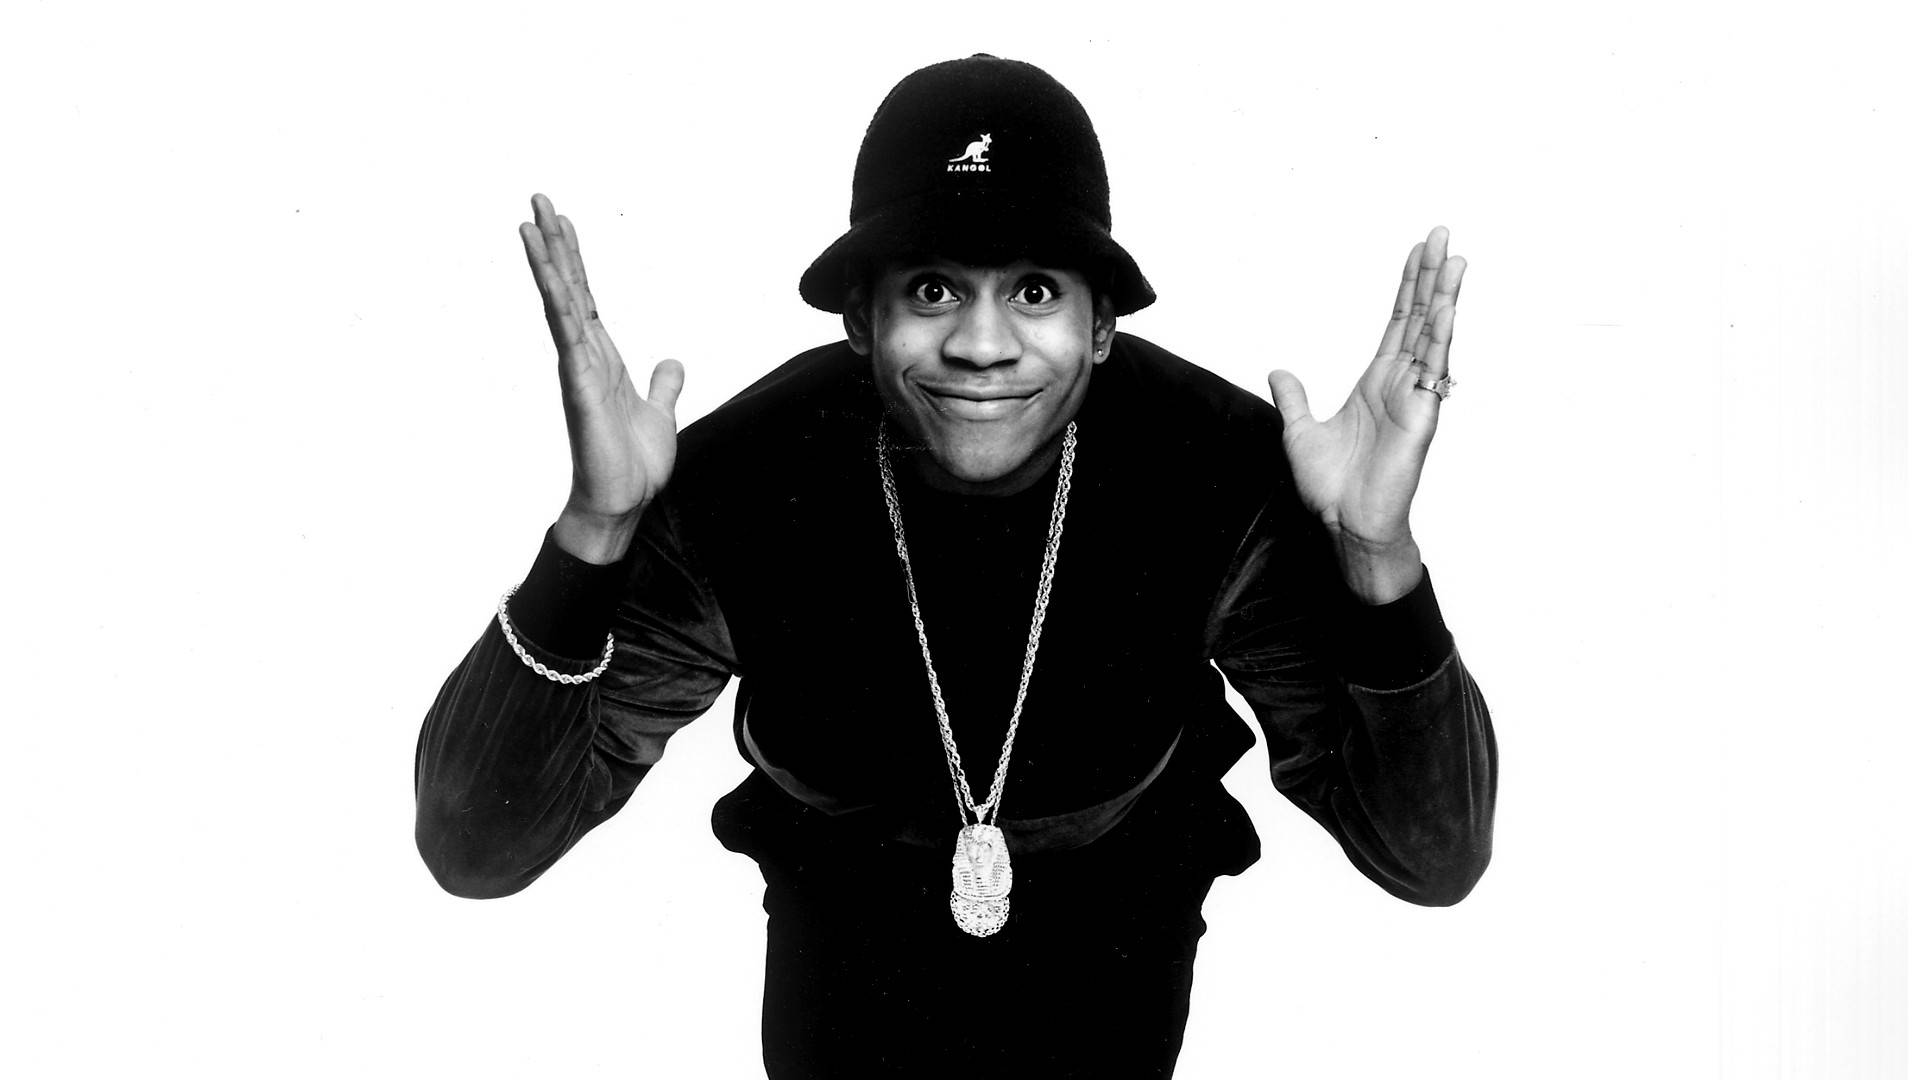 Rapper LL Cool J White And Black 1985 Photoshoot Wallpaper